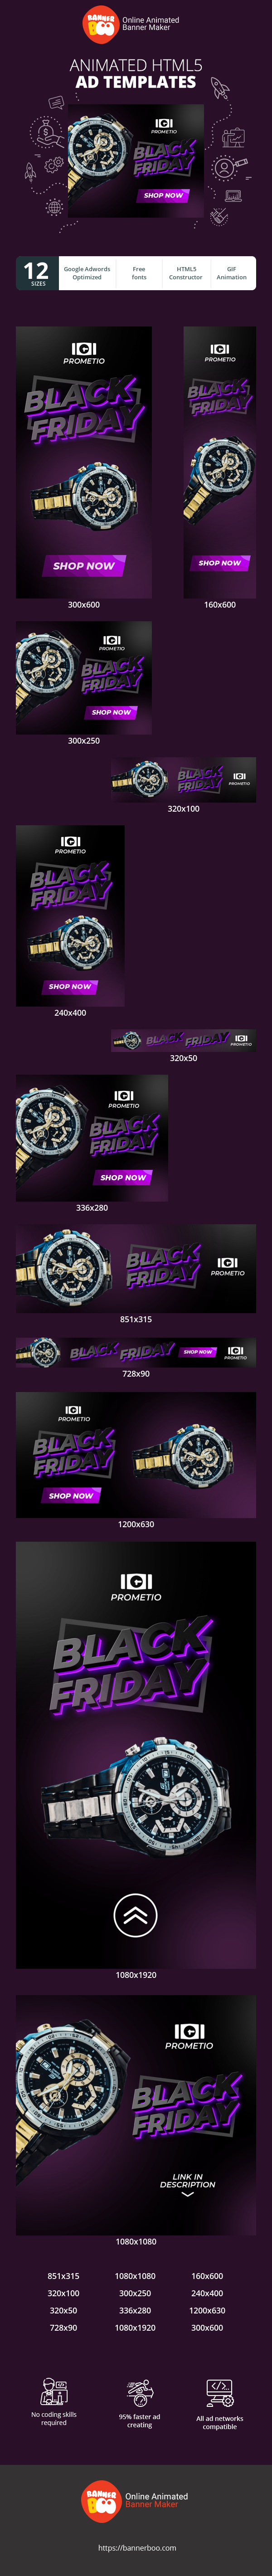 Banner ad template — Black Friday — Watches